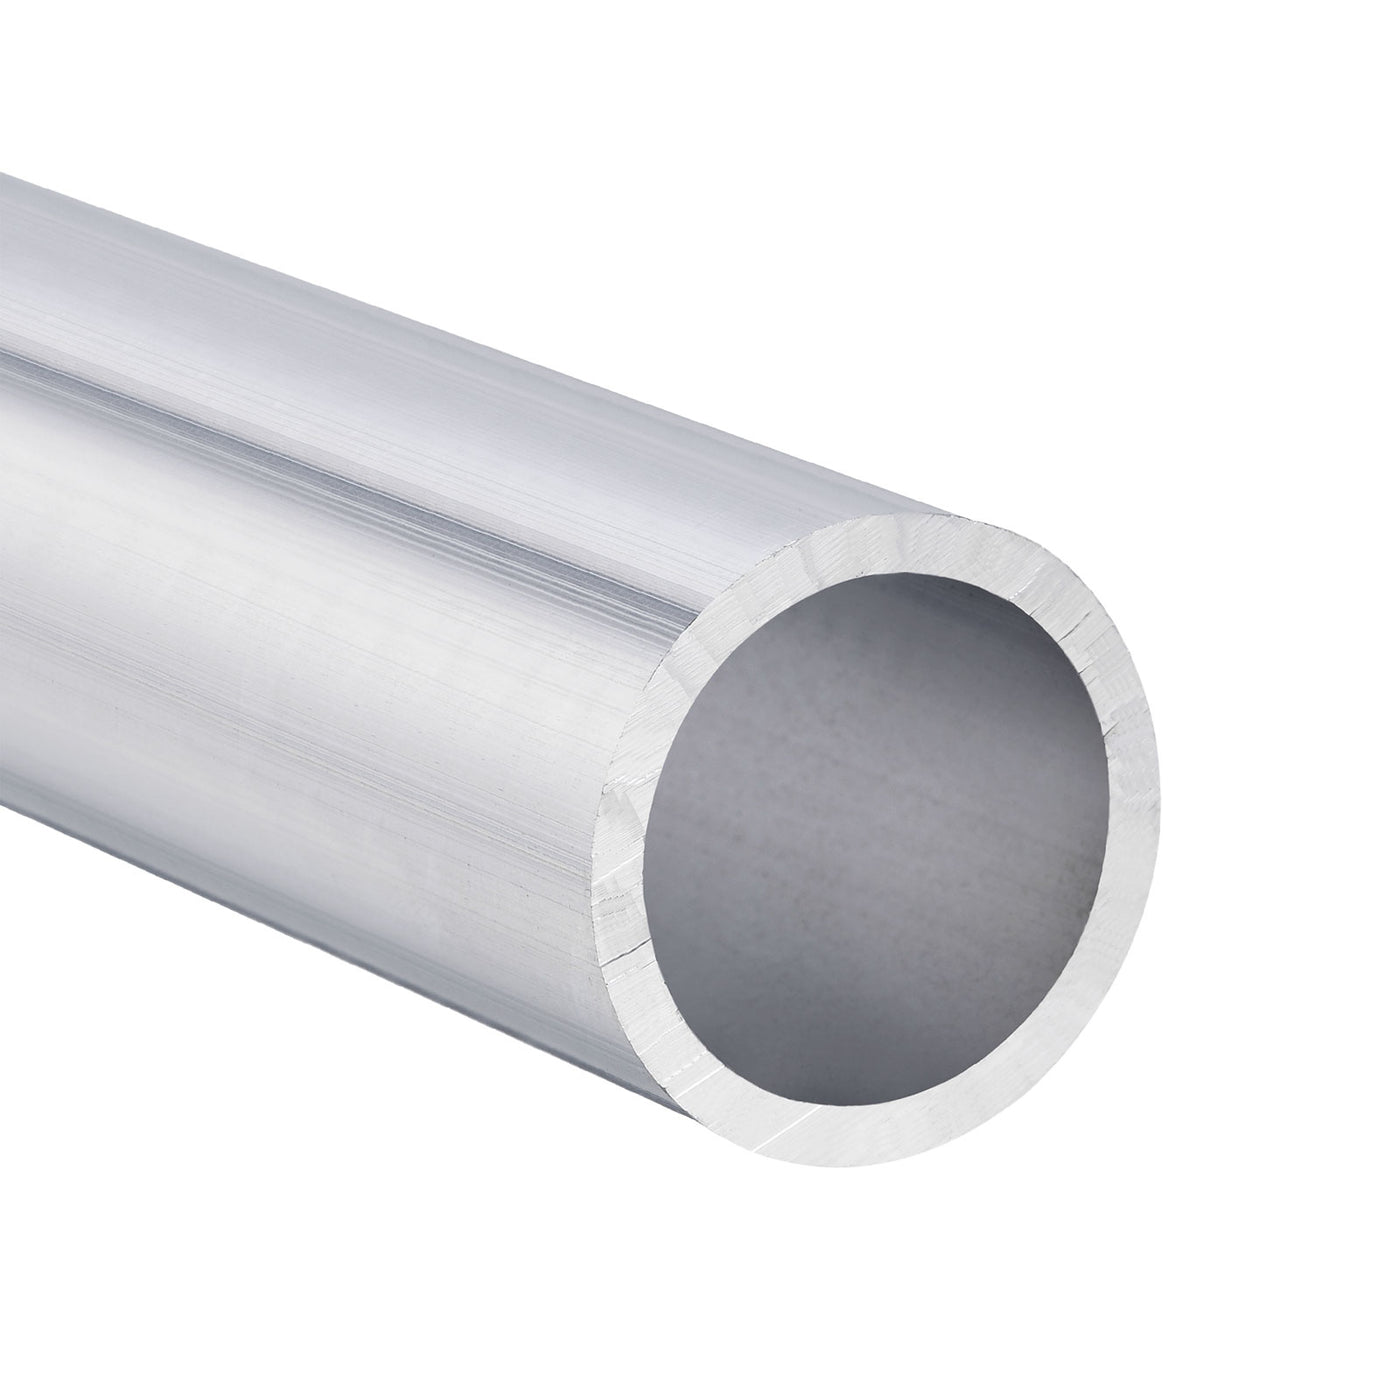 uxcell Uxcell 6063 Aluminum Tubing Seamless Straight Pipe Tube